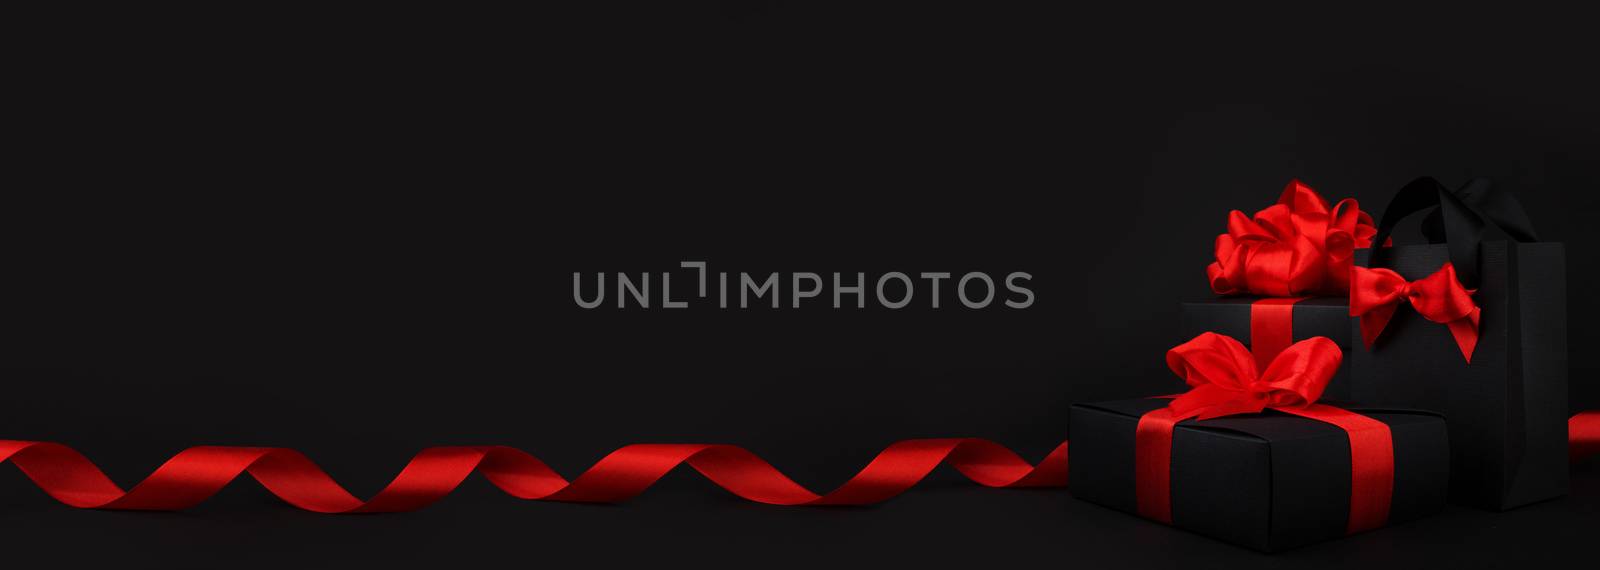 Gift box wrapped in black paper with red ribbon on black background, design banner black friday sale concept copy space for text